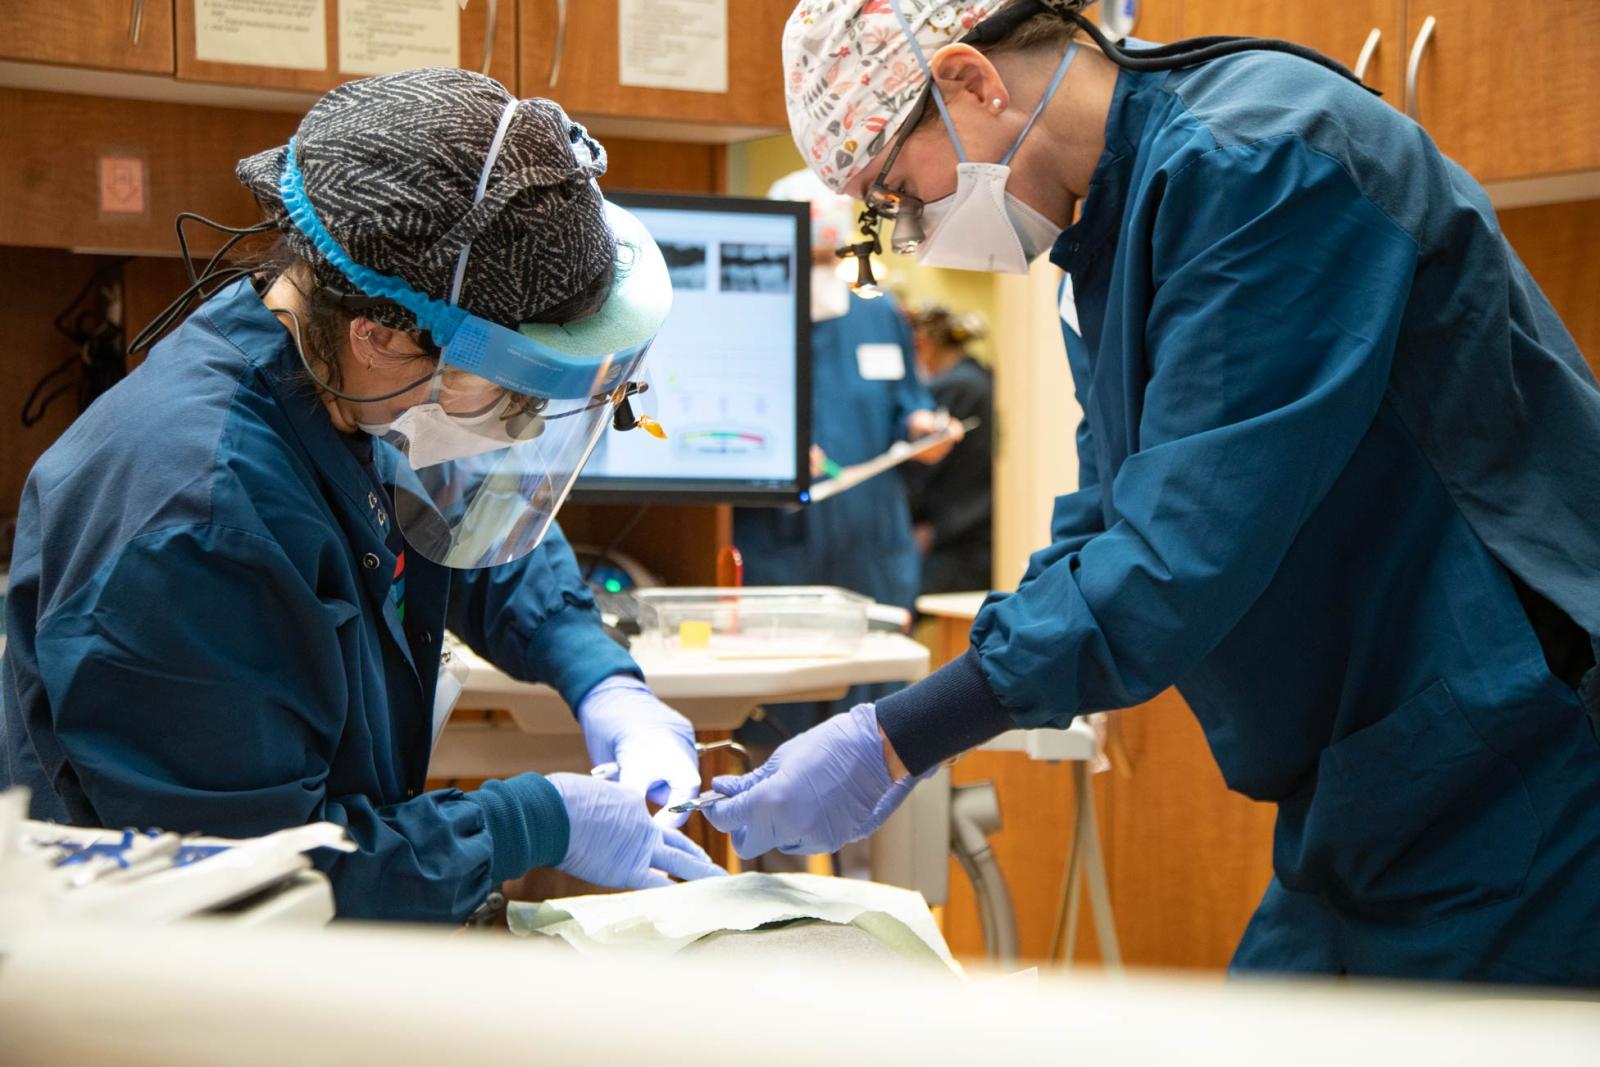 Two dental therapy students in protective gear work on a patient